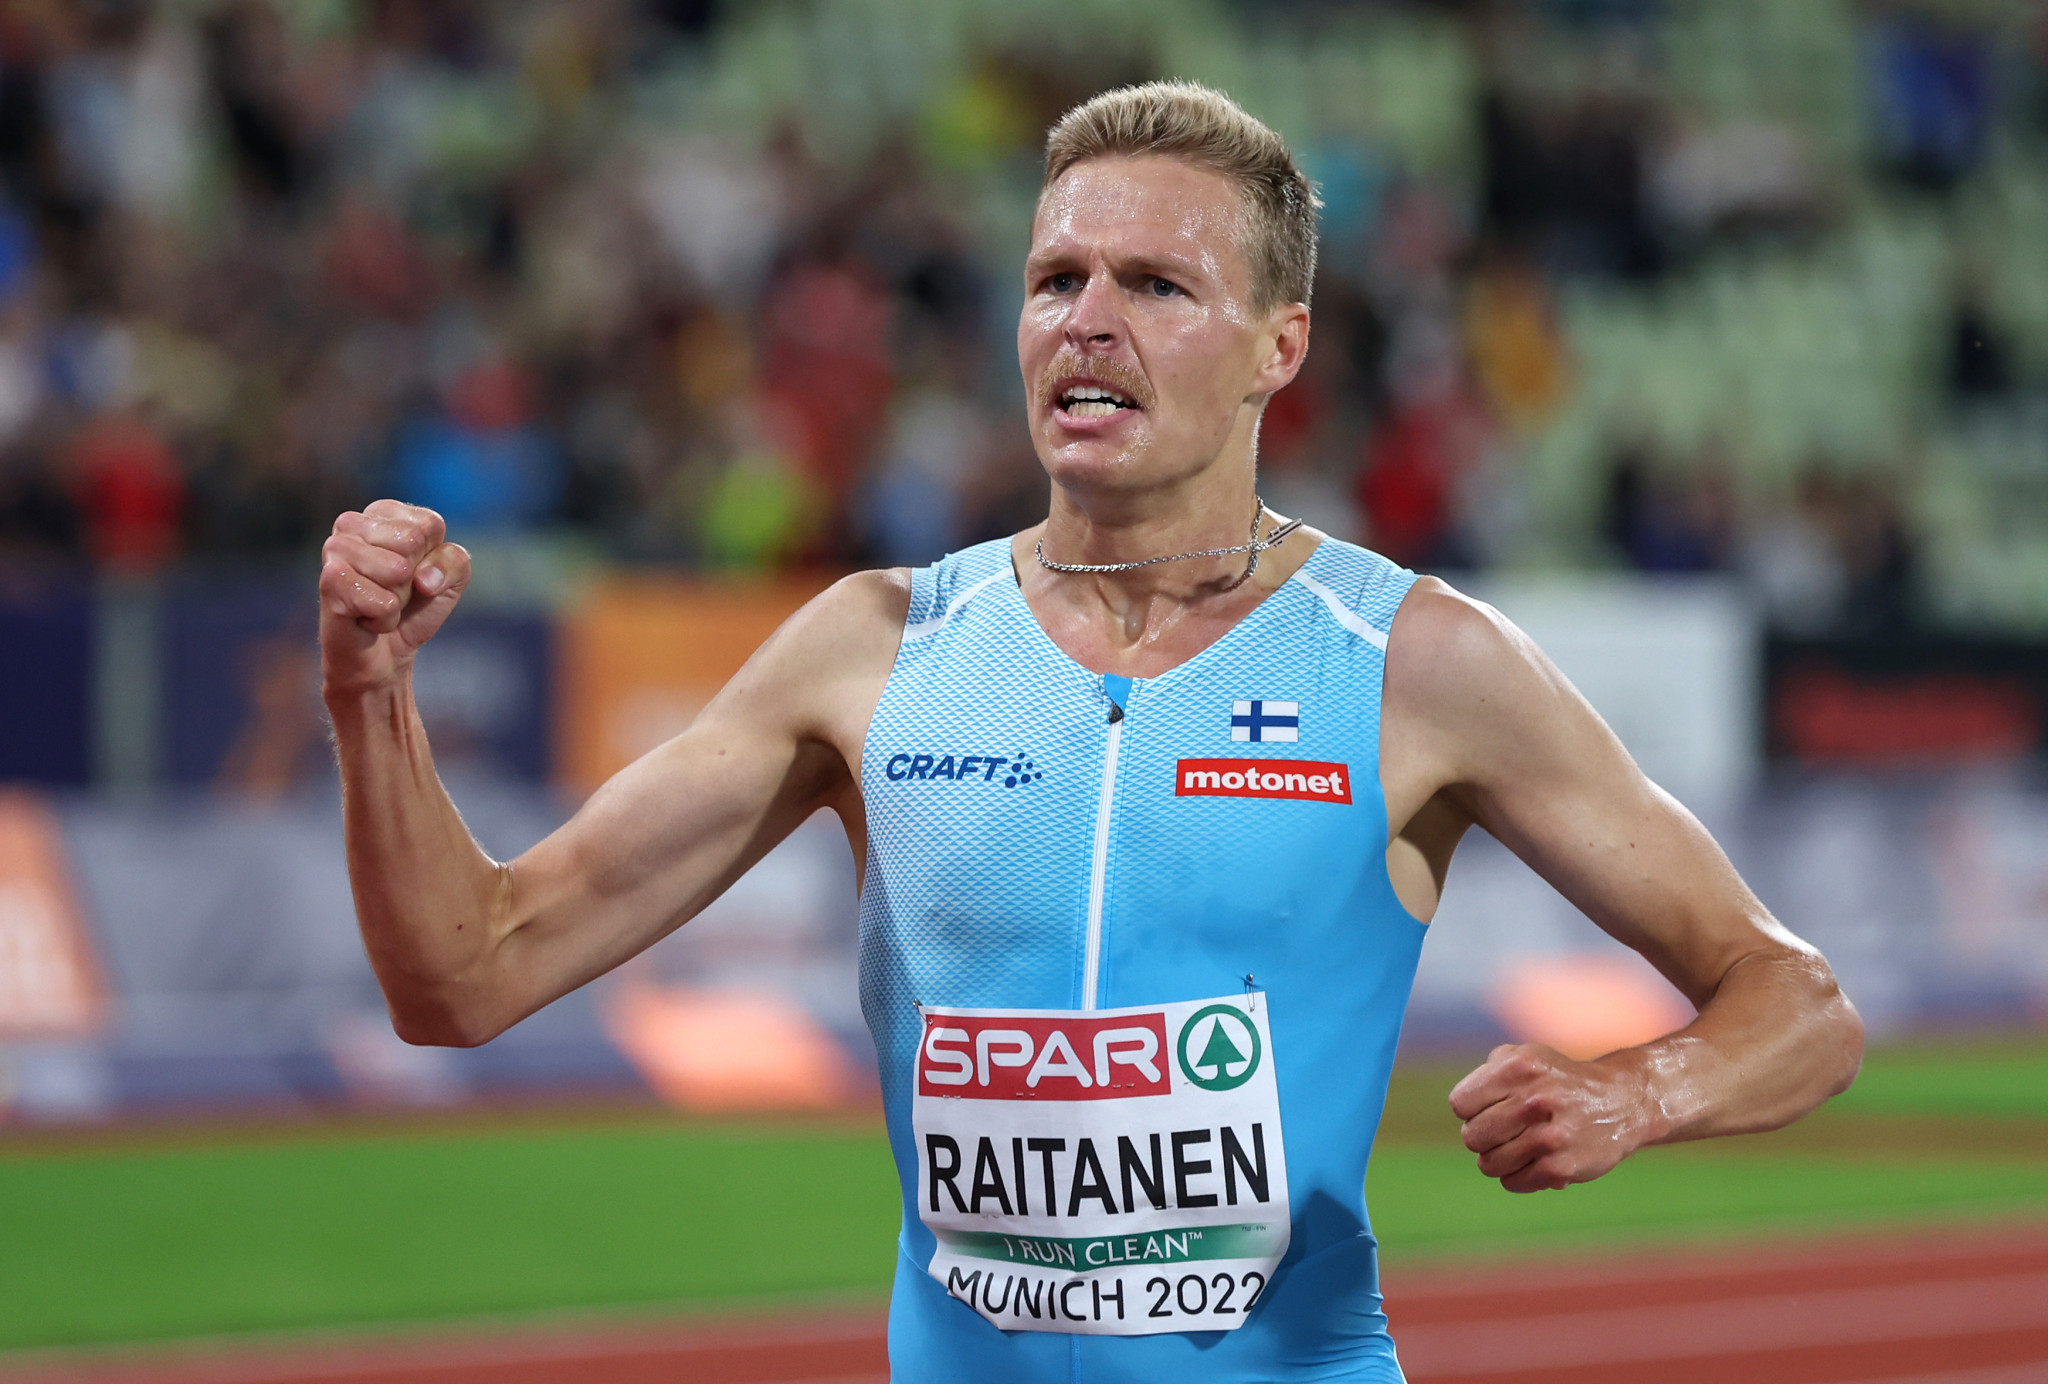 Topi Raitanen was the most high-profile Finnish athlete to test positive for COVID-19 ©Getty Images